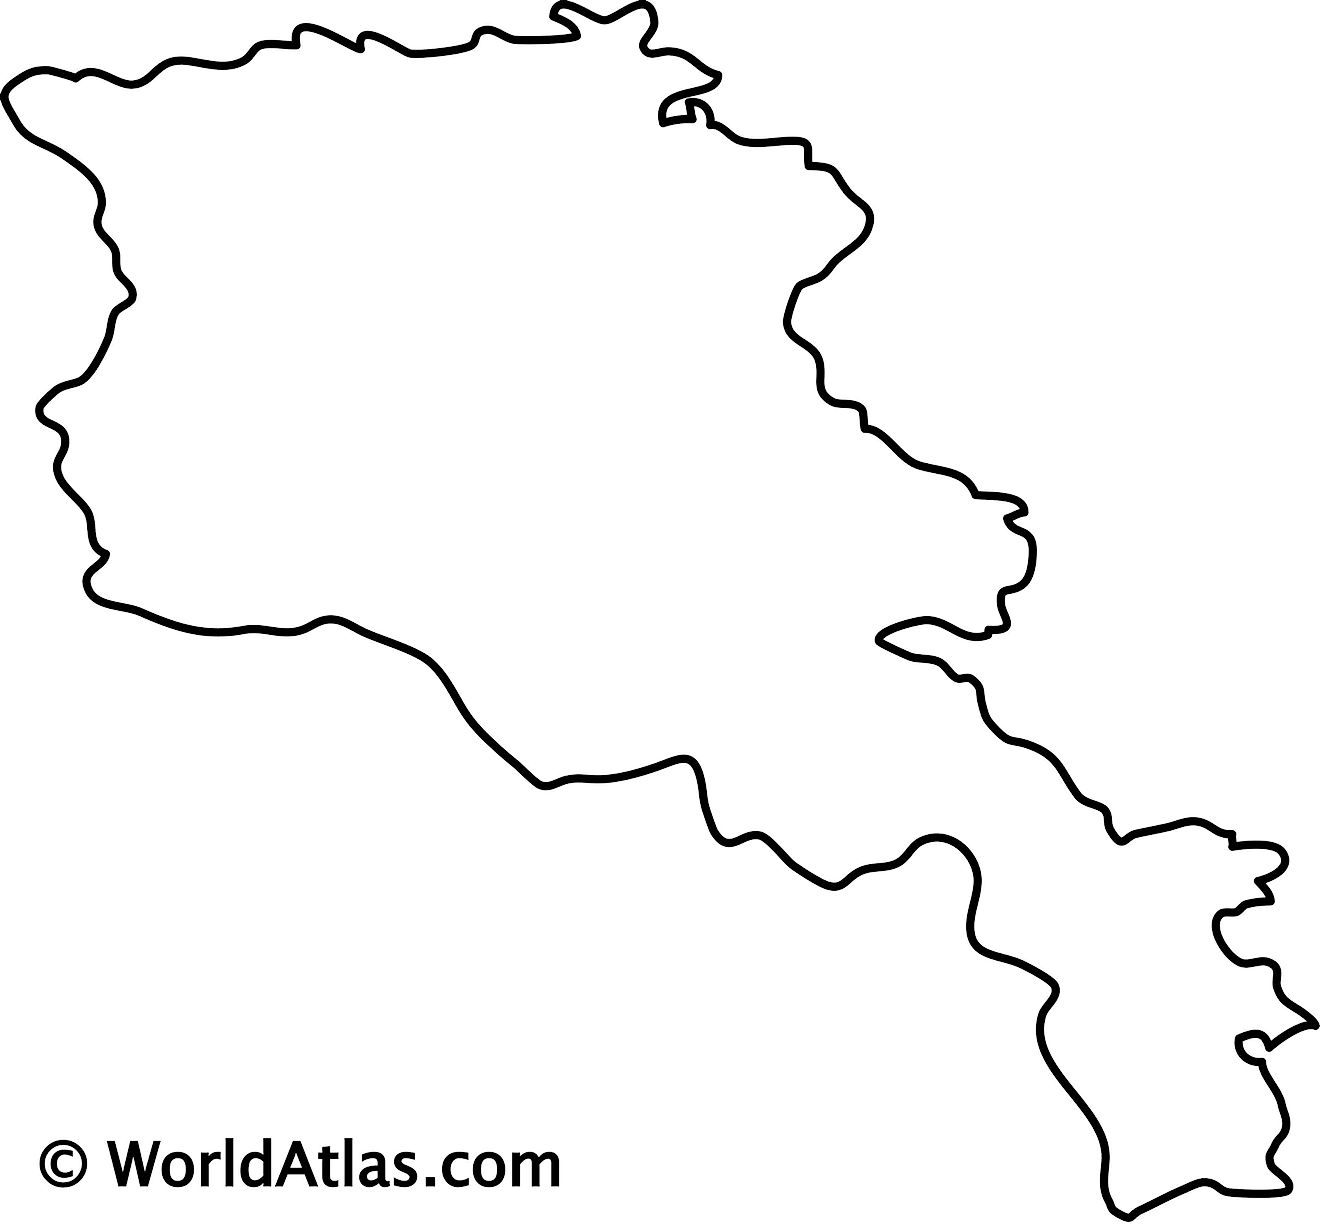 Armenia Flag Coloring Page Coloring Pages